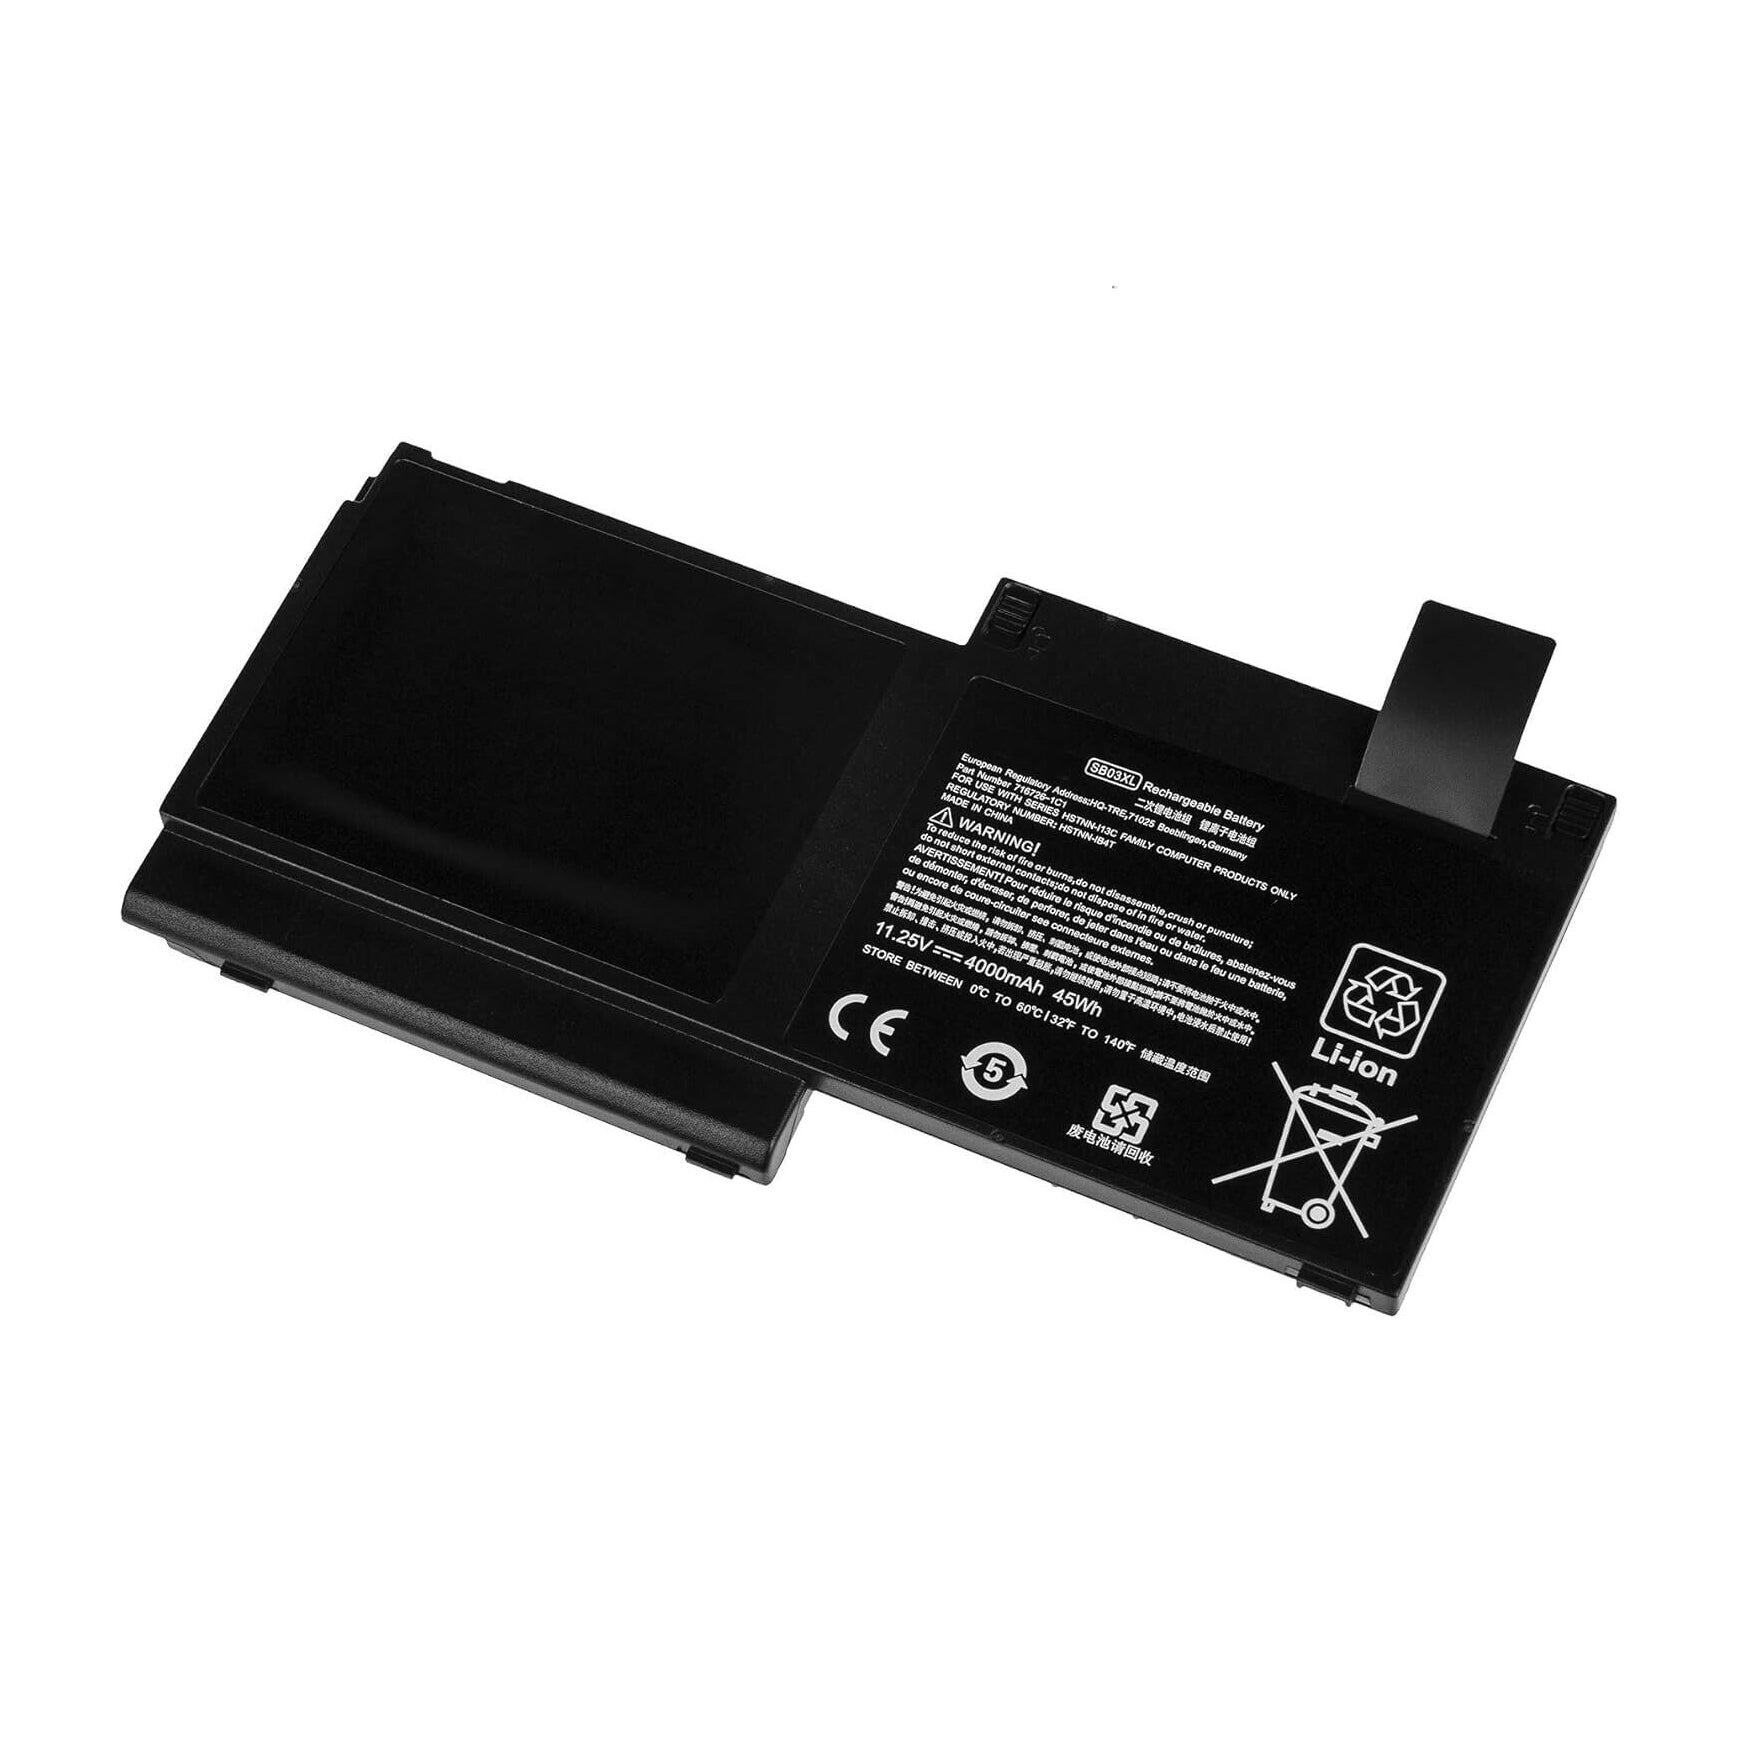 Replacement Battery For HP EliteBook 820 720 725 G1 G2 - SB03XL